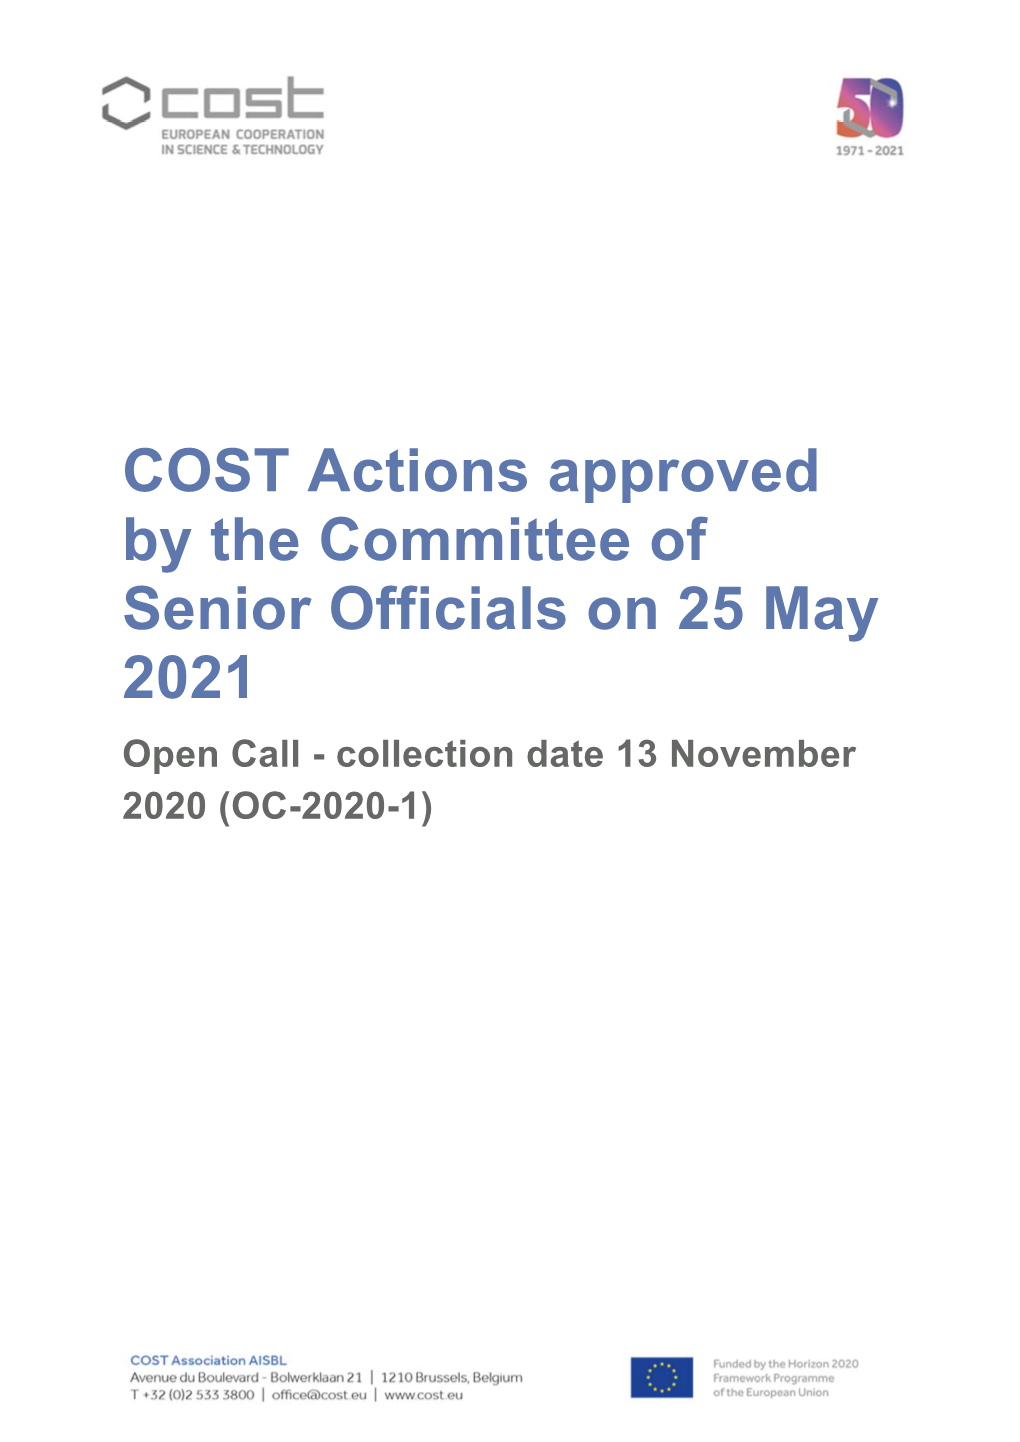 COST Actions Approved by the Committee of Senior Officials on 25 May 2021 Open Call - Collection Date 13 November 2020 (OC-2020-1)